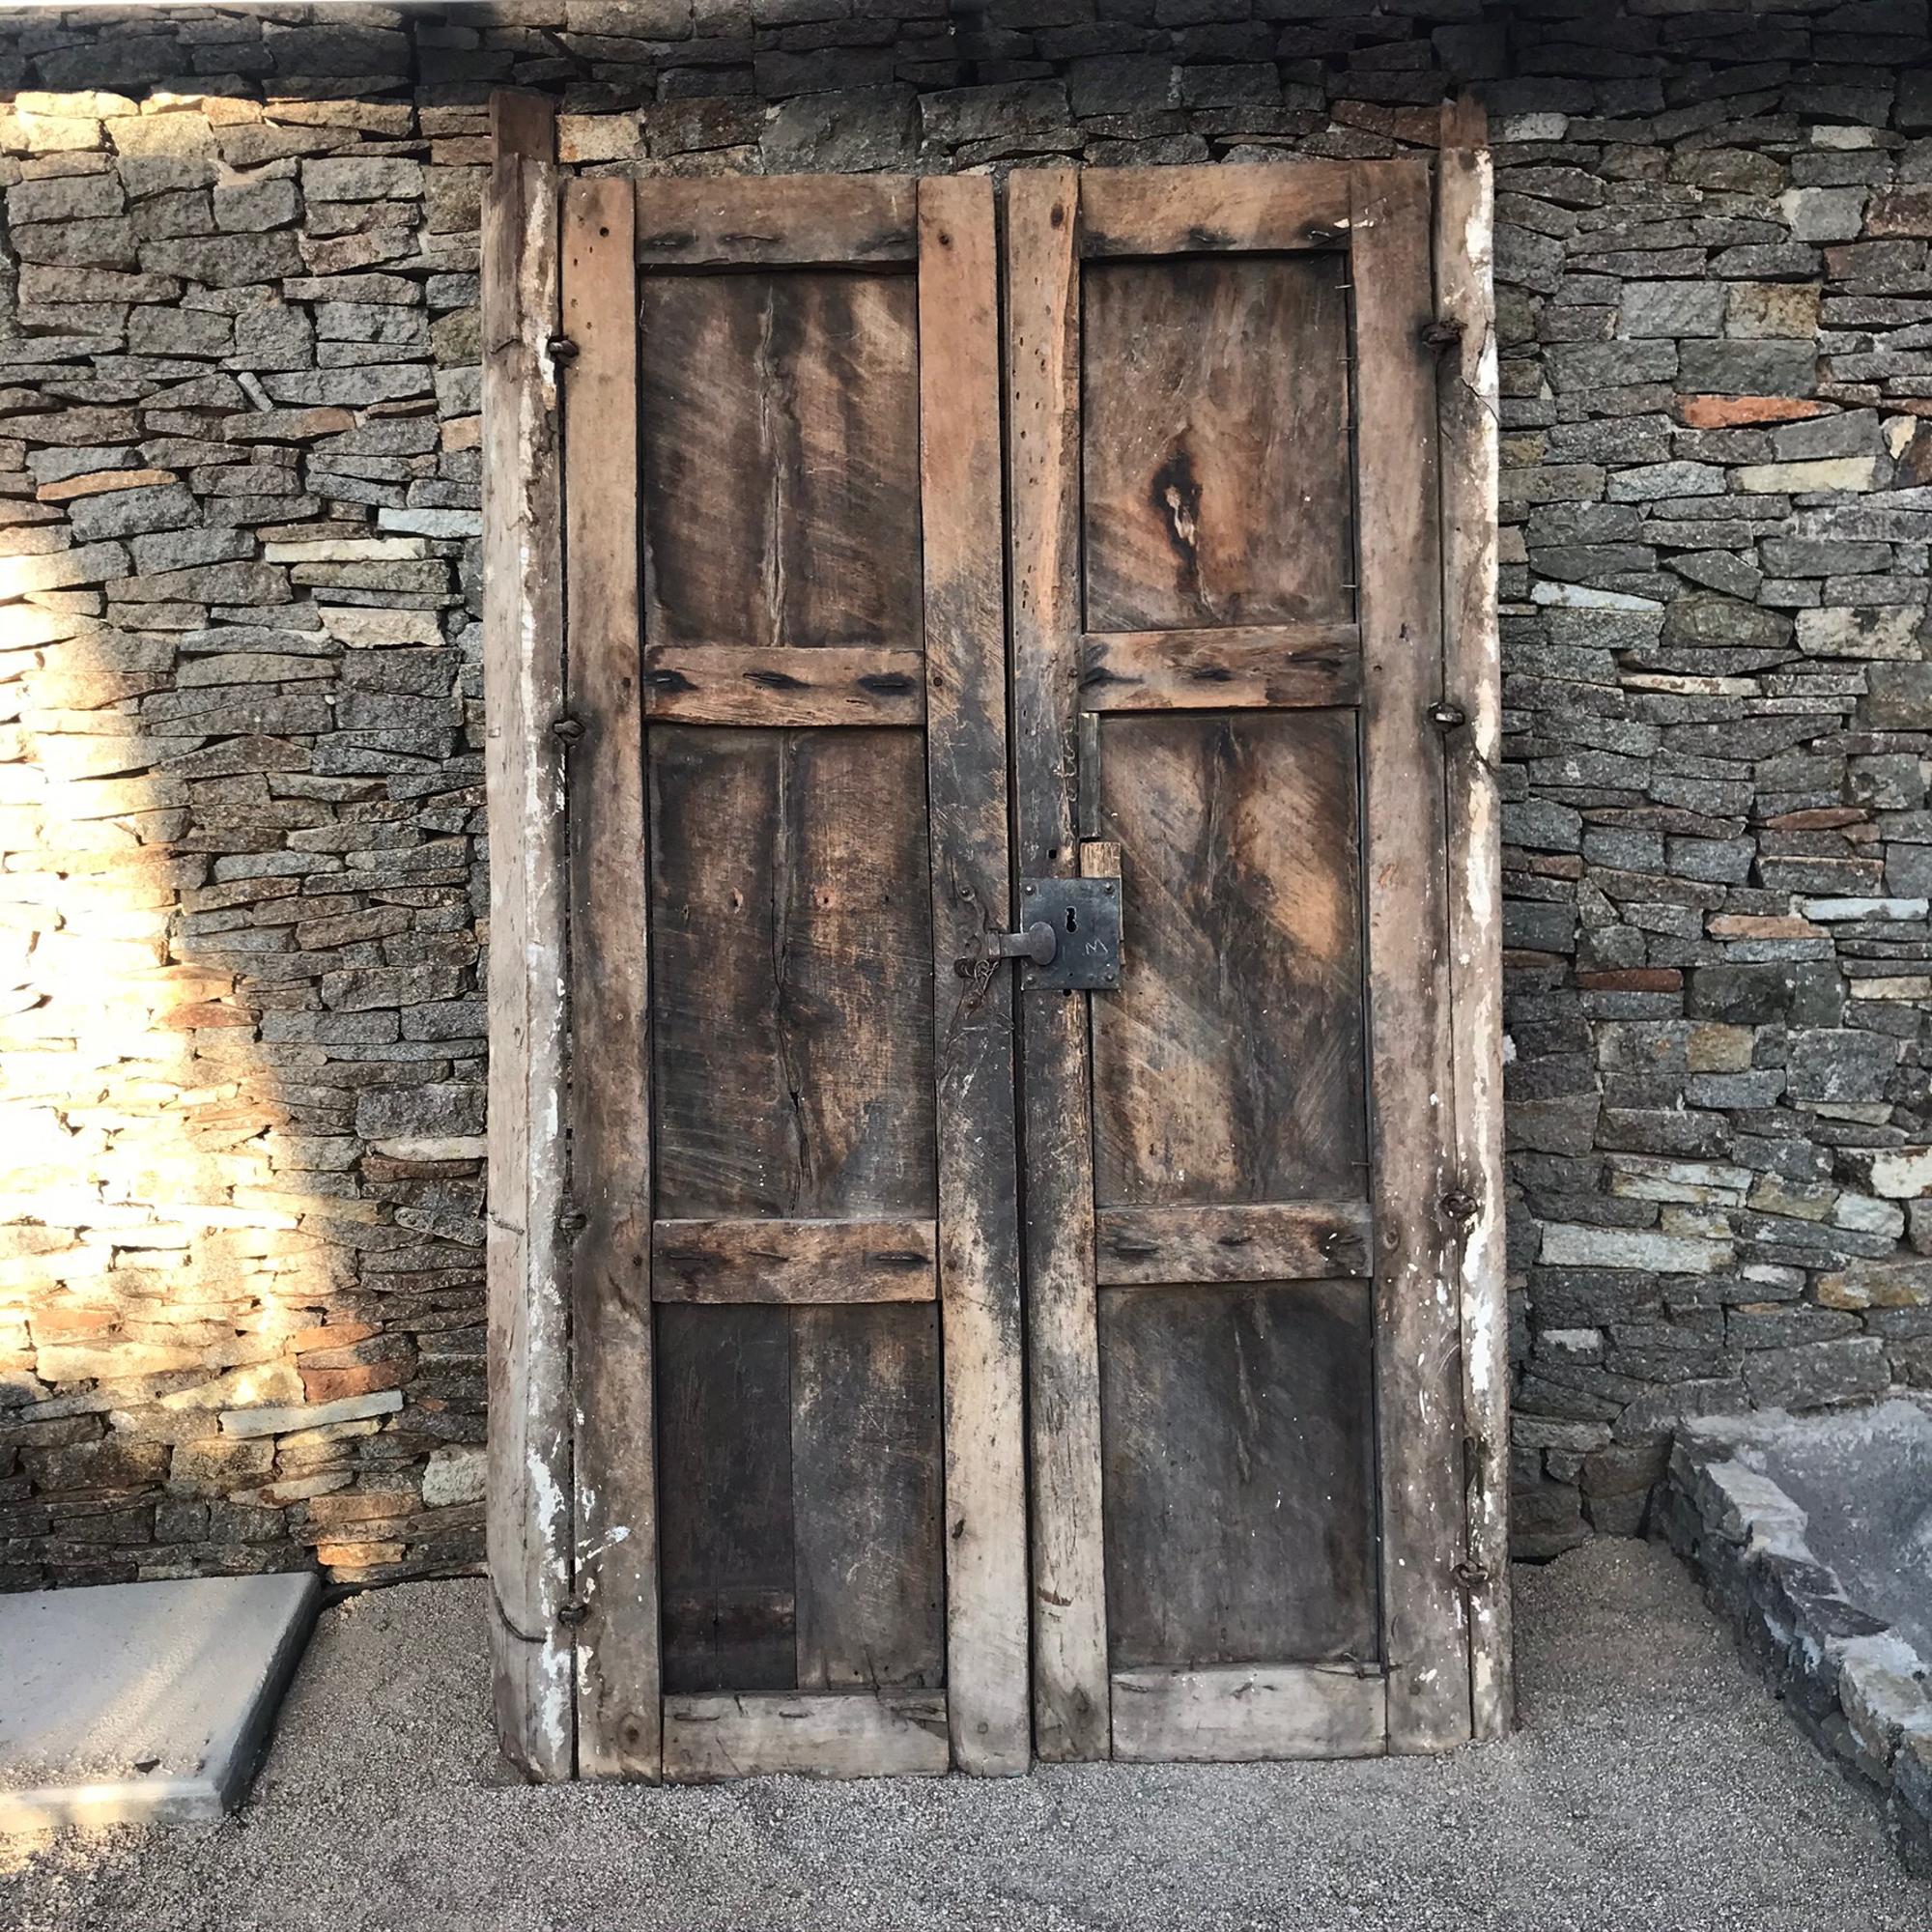 Mexican Hacienda Rustic Green Door Solid Mesquite Wood circa 1910-1920.
Handcrafted by Mexican Artisans Jalisco Mexico
48.5W x 81 H x 4.5 D each door panel is 21.75
An unrestored vintage item in wonderfully distressed condition.
Refer to